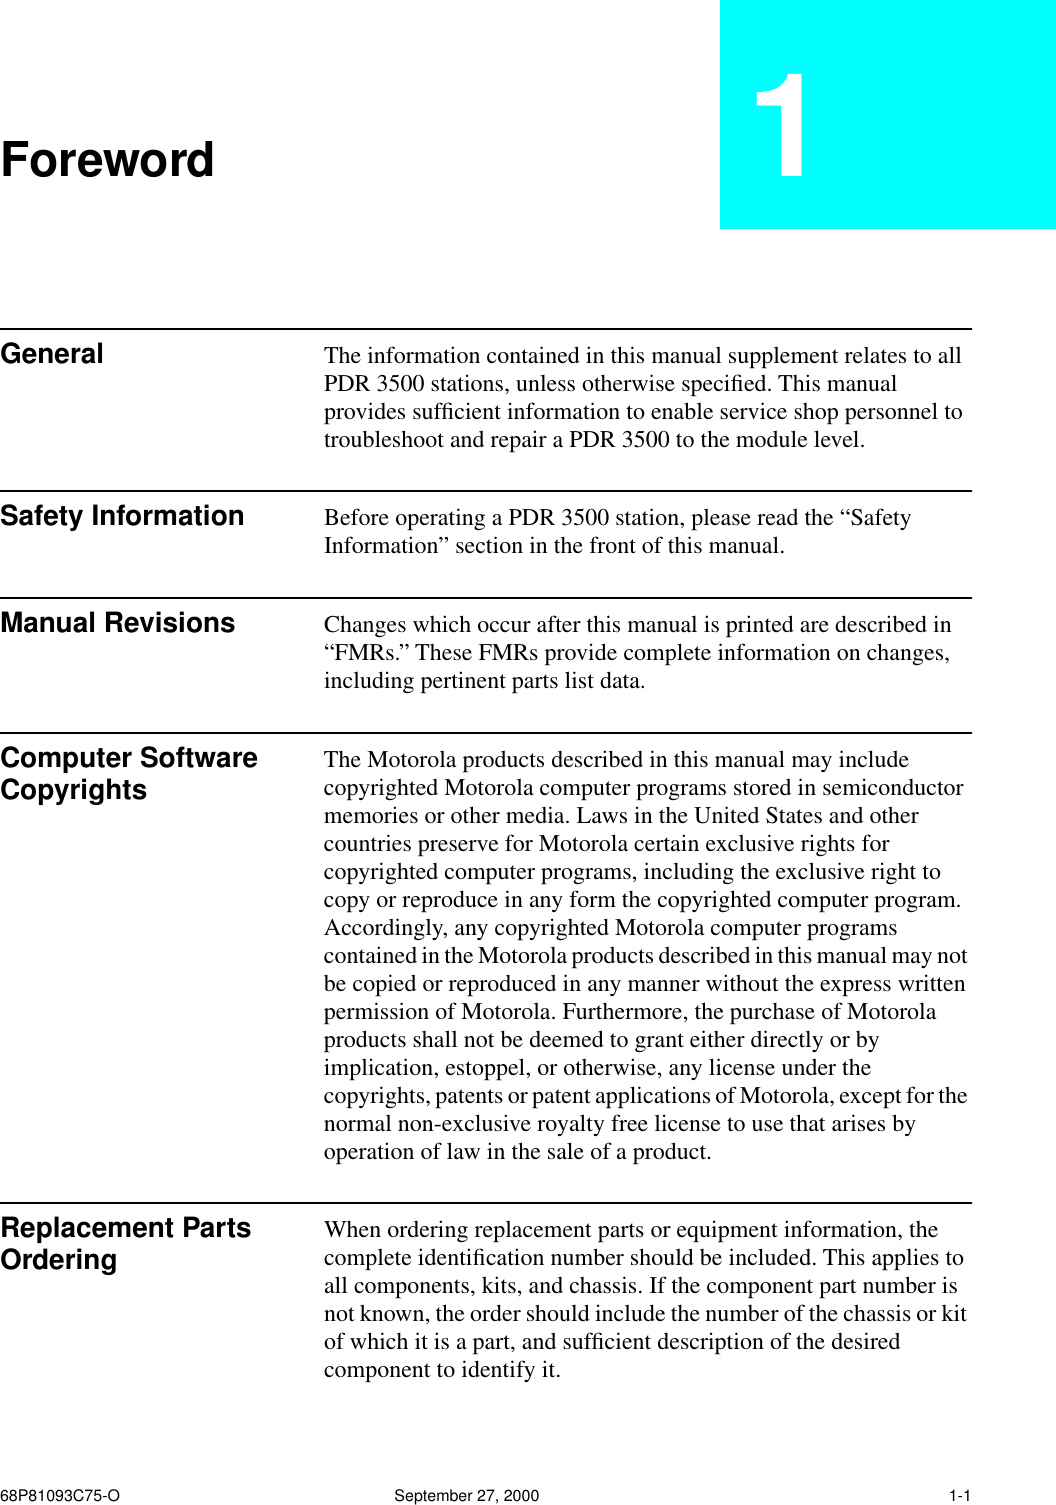  68P81093C75-O September 27, 2000 1-1 Foreword 1 General The information contained in this manual supplement relates to all PDR 3500 stations, unless otherwise speciﬁed. This manual provides sufﬁcient information to enable service shop personnel to troubleshoot and repair a PDR 3500 to the module level. Safety Information Before operating a PDR 3500 station, please read the “Safety Information” section in the front of this manual. Manual Revisions Changes which occur after this manual is printed are described in “FMRs.” These FMRs provide complete information on changes, including pertinent parts list data. Computer Software Copyrights The Motorola products described in this manual may include copyrighted Motorola computer programs stored in semiconductor memories or other media. Laws in the United States and other countries preserve for Motorola certain exclusive rights for copyrighted computer programs, including the exclusive right to copy or reproduce in any form the copyrighted computer program. Accordingly, any copyrighted Motorola computer programs contained in the Motorola products described in this manual may not be copied or reproduced in any manner without the express written permission of Motorola. Furthermore, the purchase of Motorola products shall not be deemed to grant either directly or by implication, estoppel, or otherwise, any license under the copyrights, patents or patent applications of Motorola, except for the normal non-exclusive royalty free license to use that arises by operation of law in the sale of a product. Replacement Parts Ordering  When ordering replacement parts or equipment information, the complete identiﬁcation number should be included. This applies to all components, kits, and chassis. If the component part number is not known, the order should include the number of the chassis or kit of which it is a part, and sufﬁcient description of the desired component to identify it.